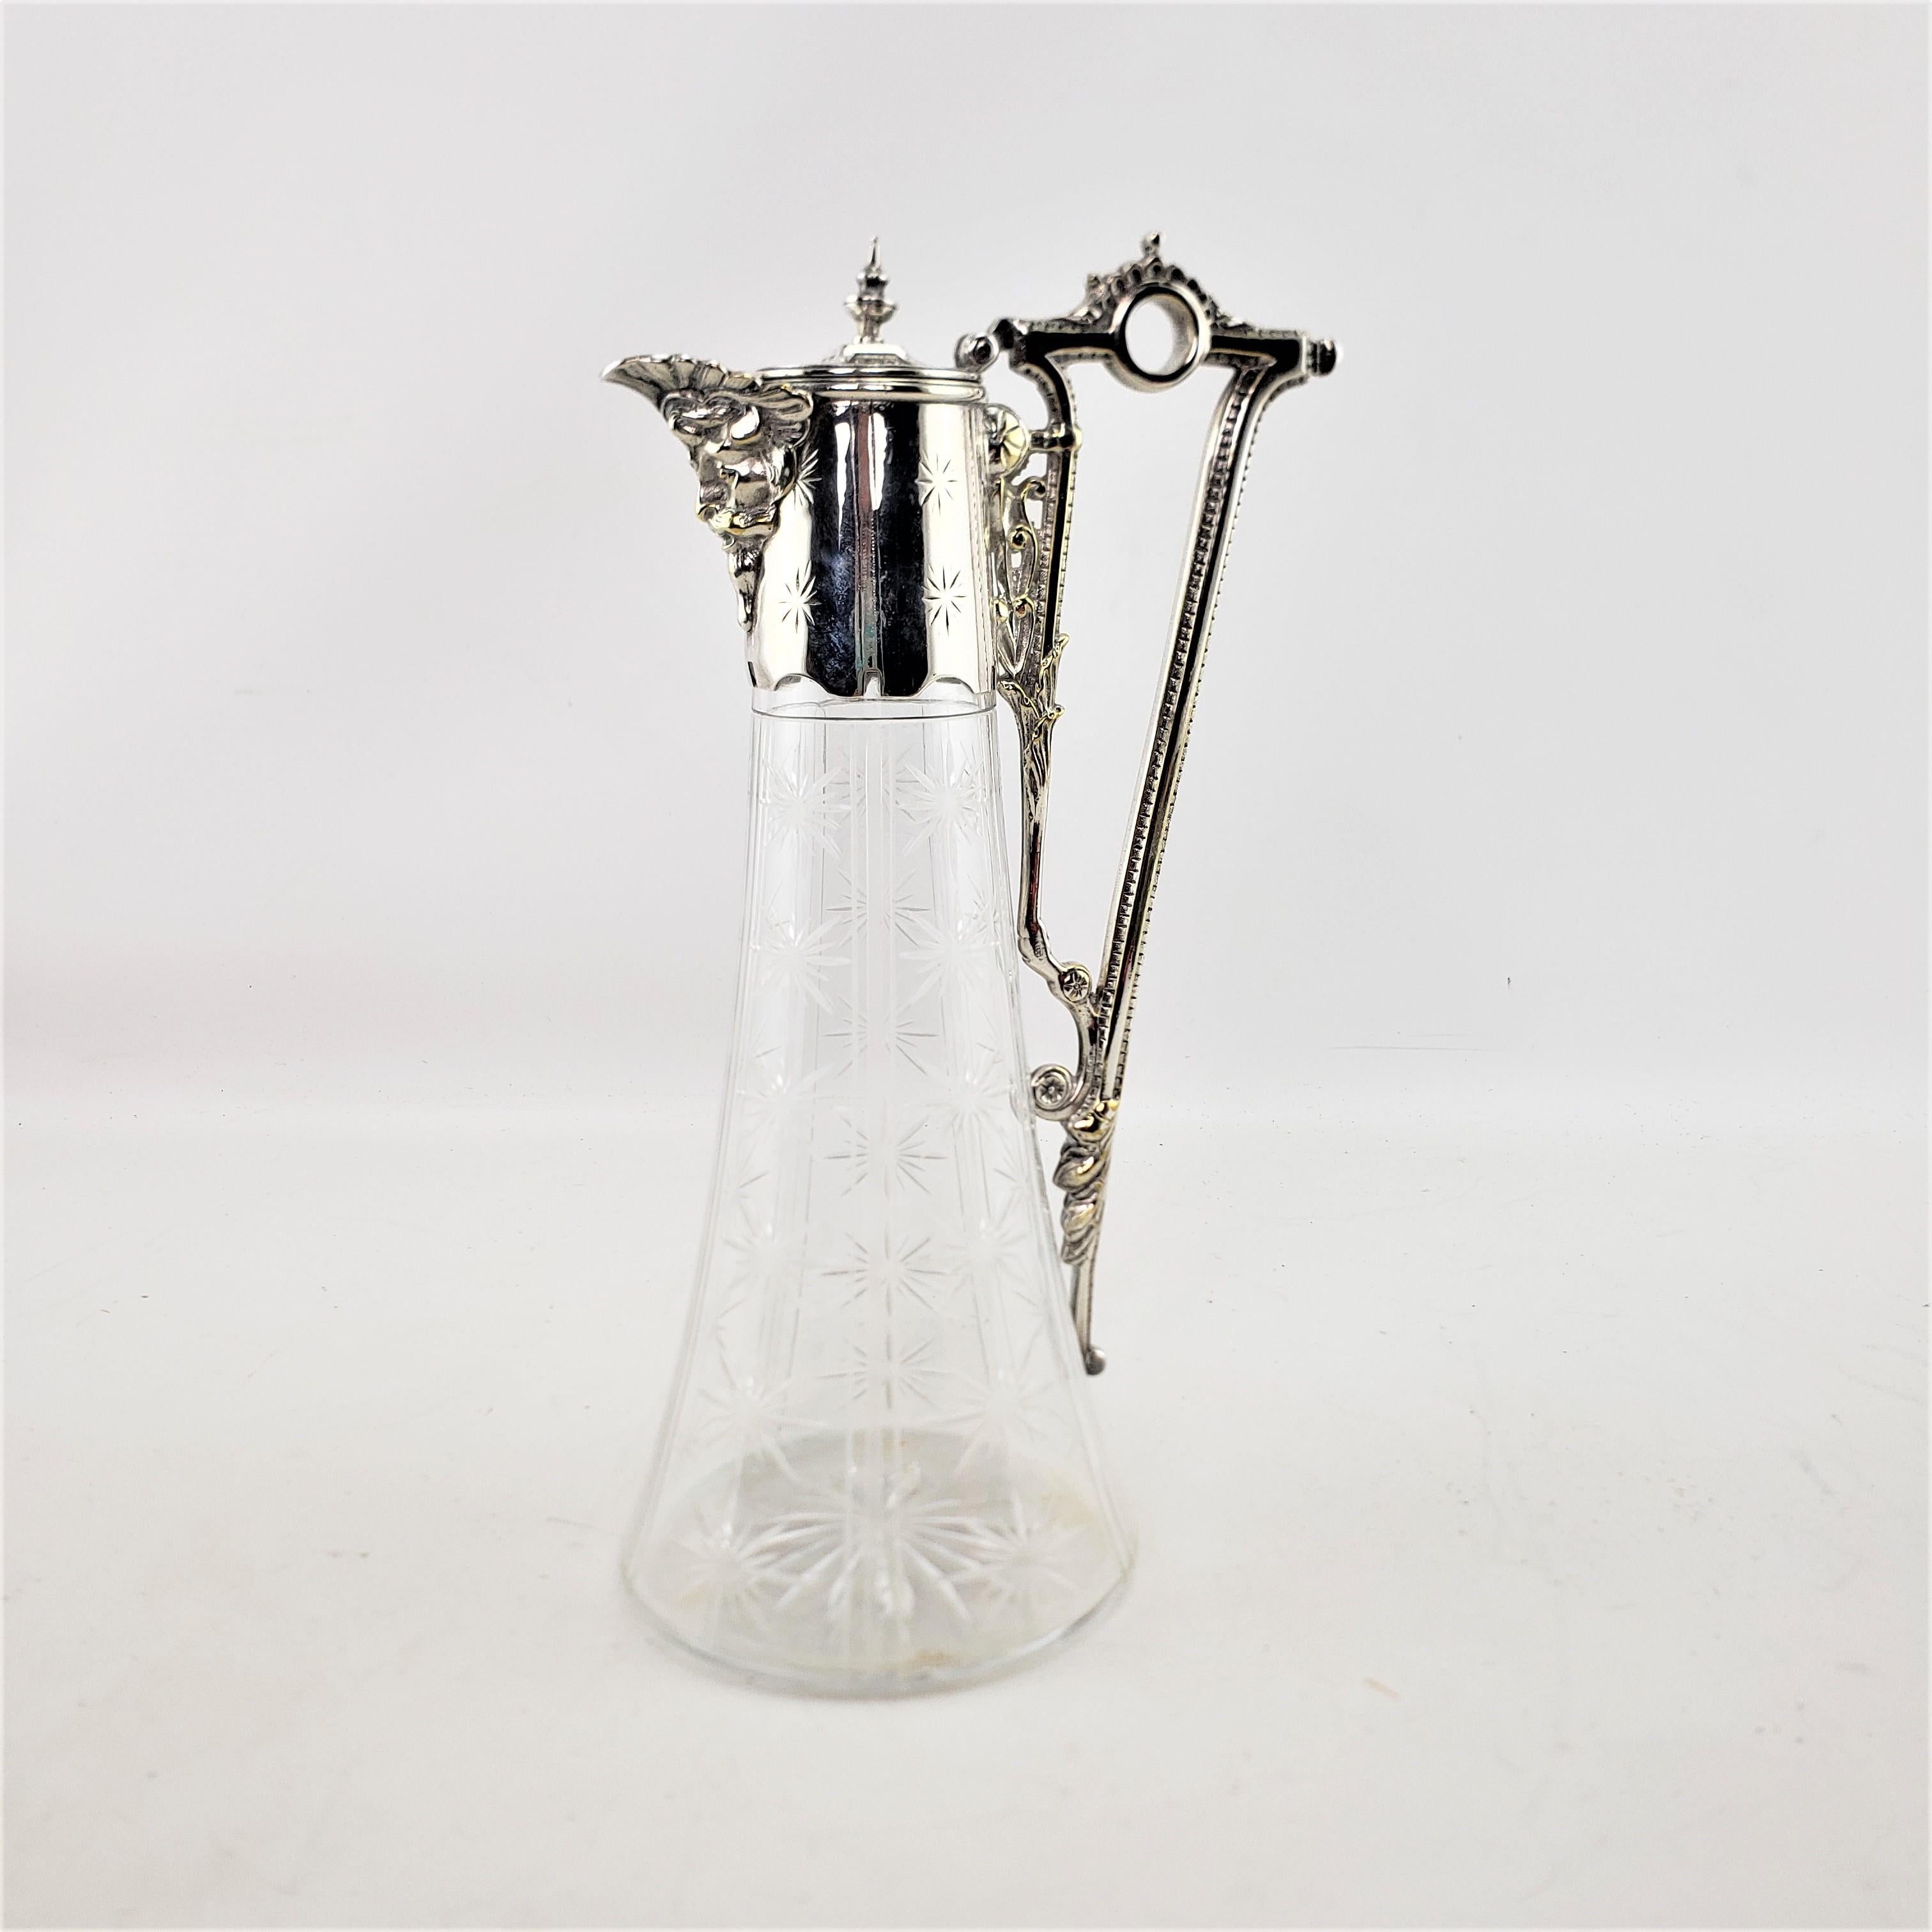 This antique cut crystal and silver plate mounted claret jug is unsigned, but presumed to have originated from England and dates to approximately 1900 and done in the period Edwardian style. The claret jug is done with a tapered cut crystal base